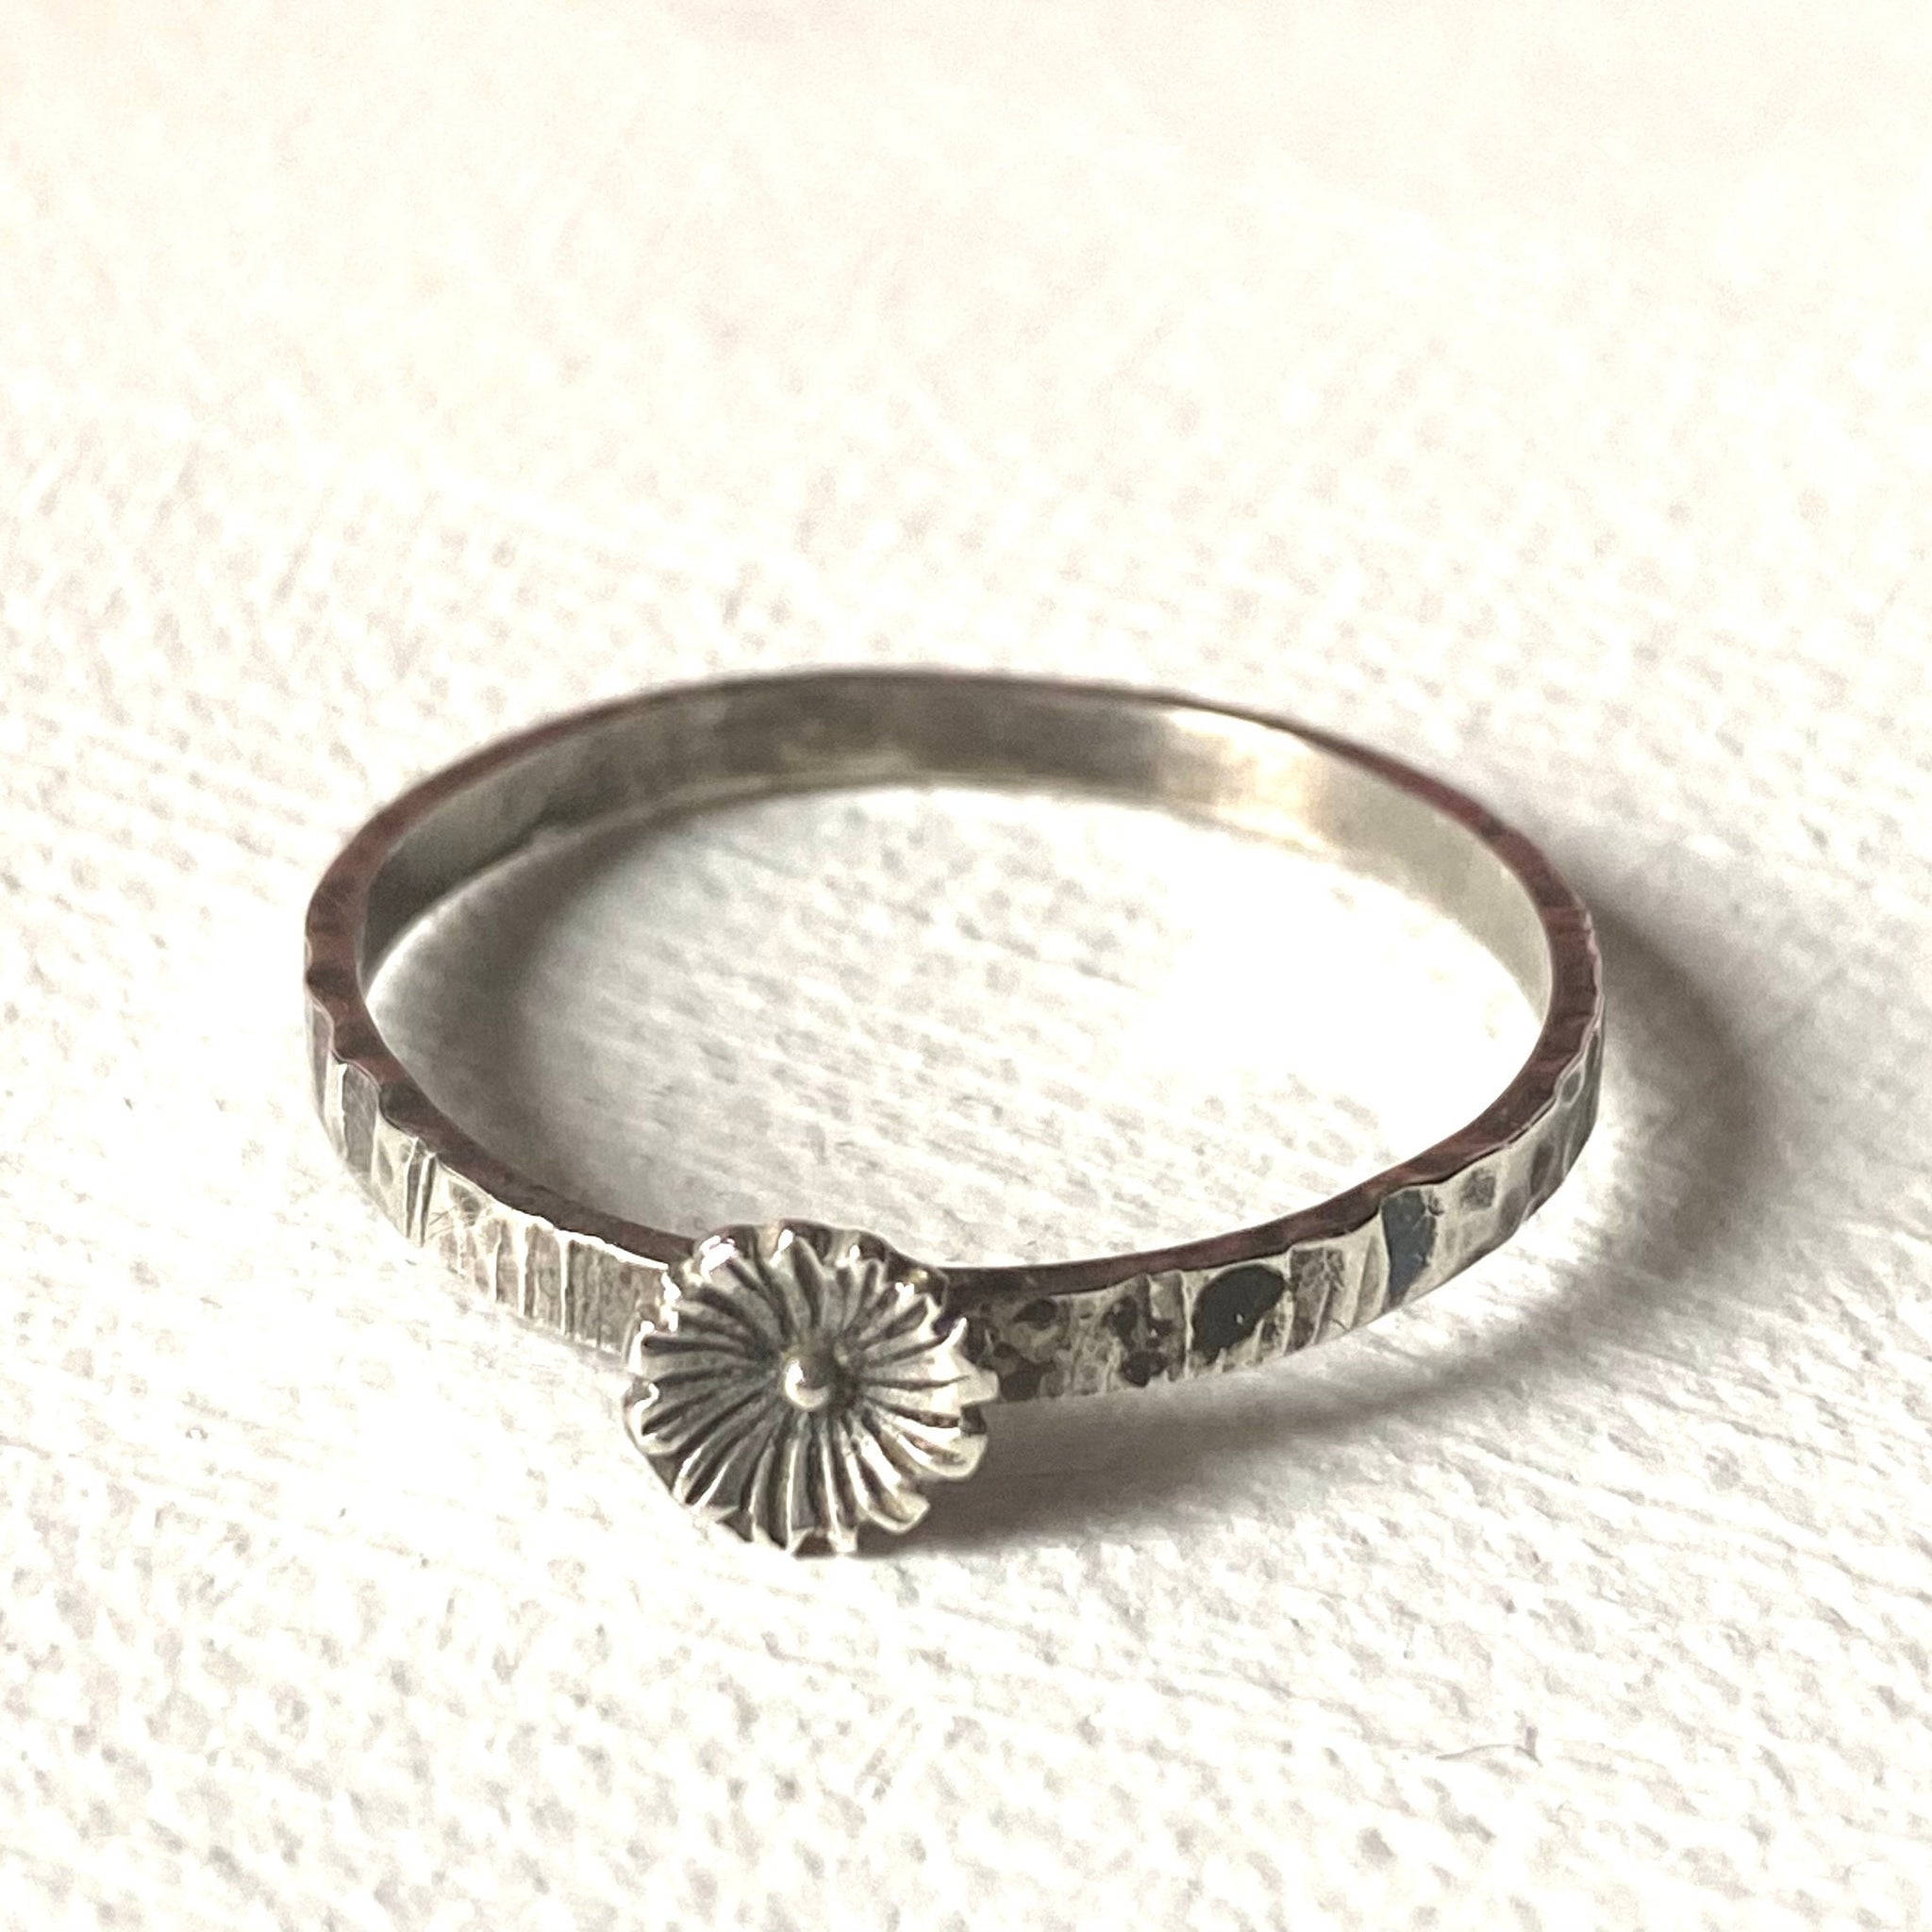 Flower Ring, large Sterling Flower Ring, Silver texture ring - Size 10.5 Janine Gerade